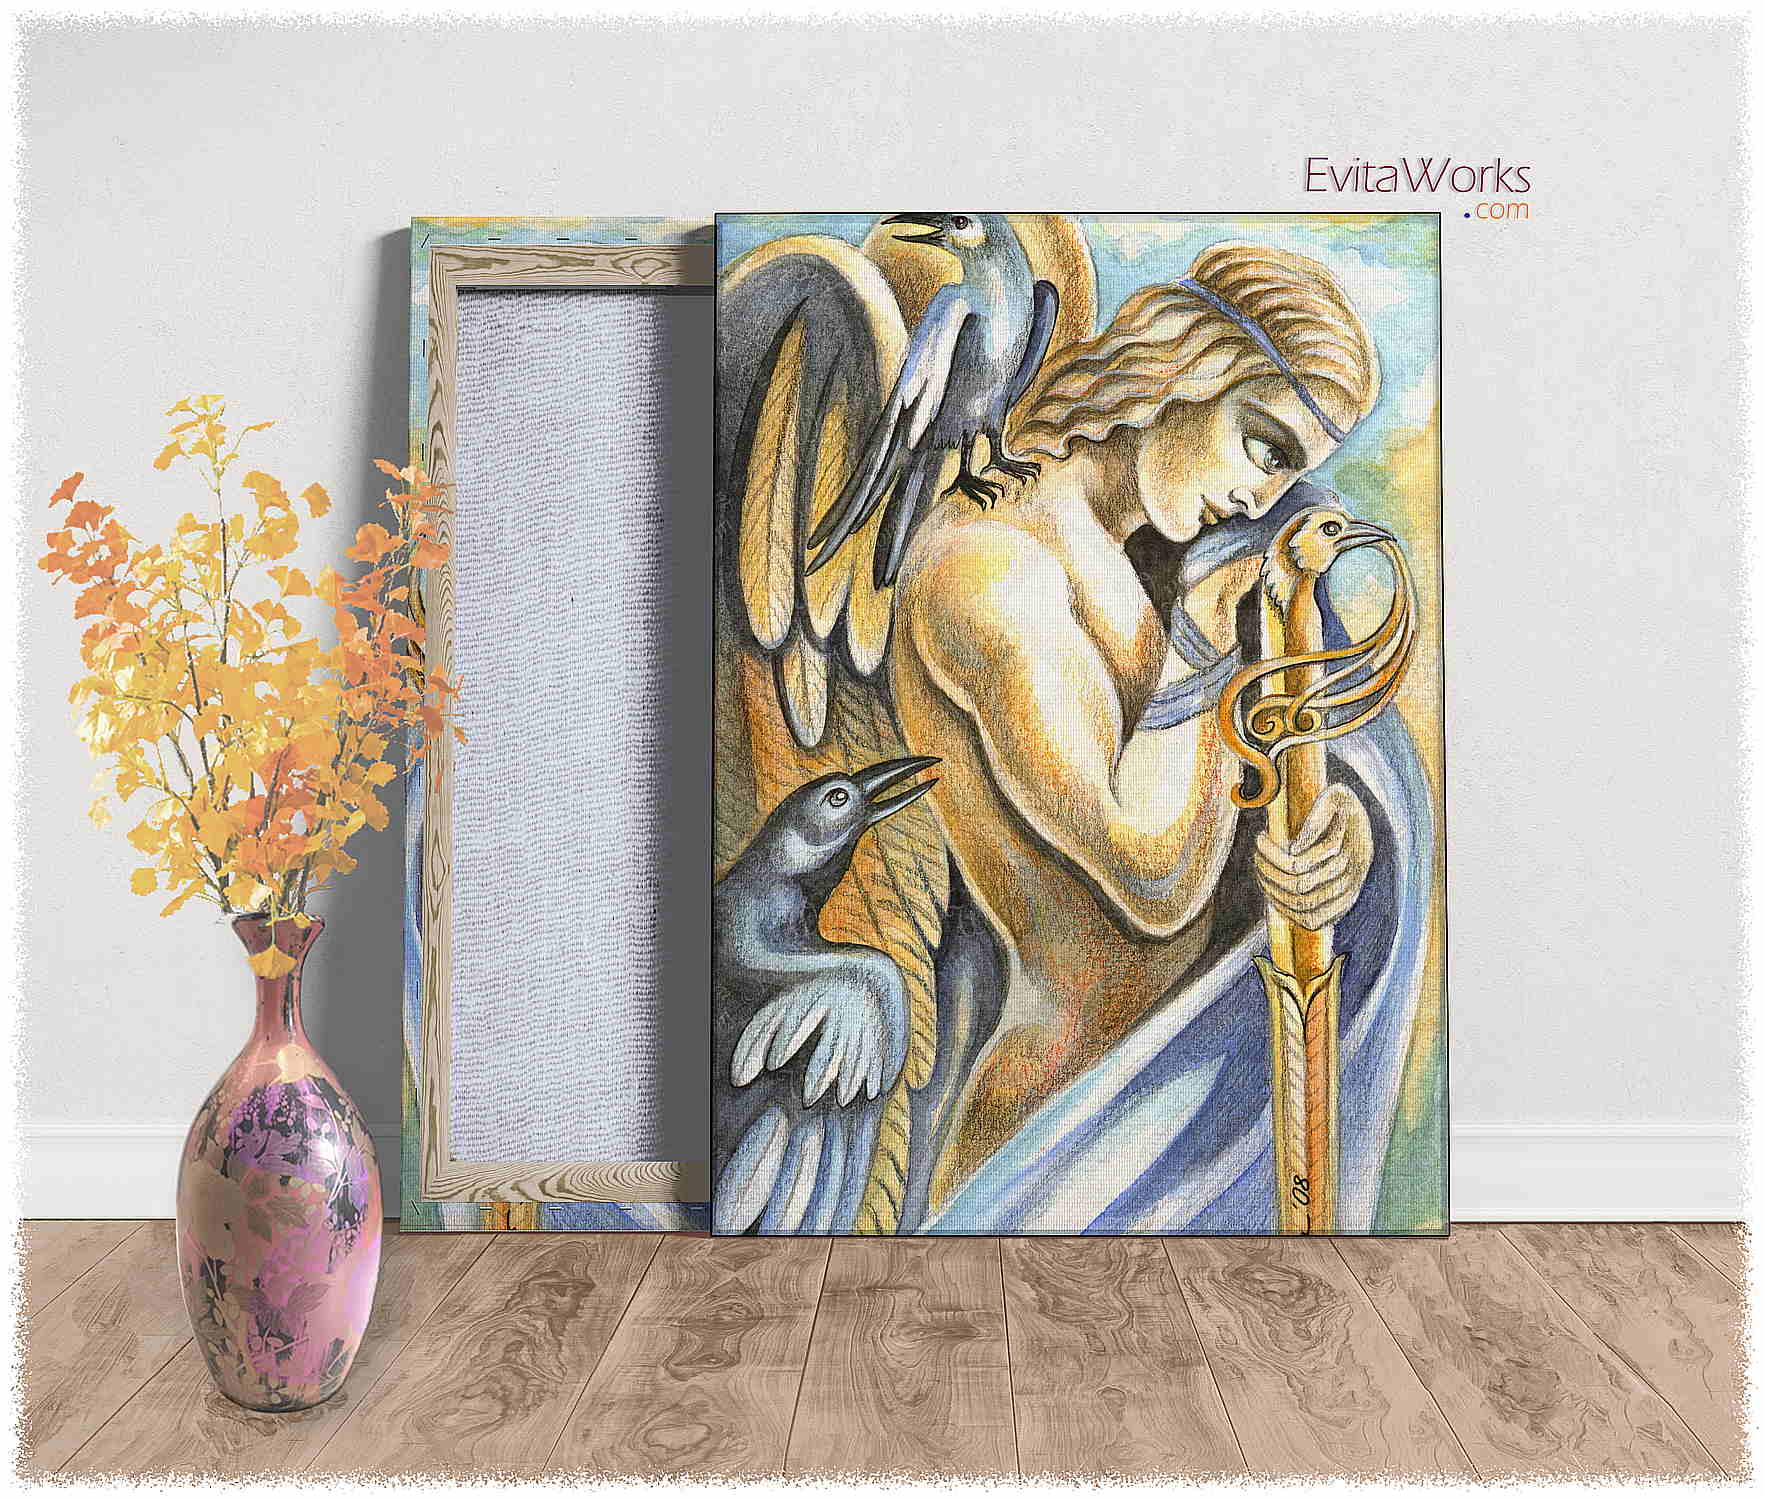 Hit to learn about "Angel 02, mythical man art" on canvases